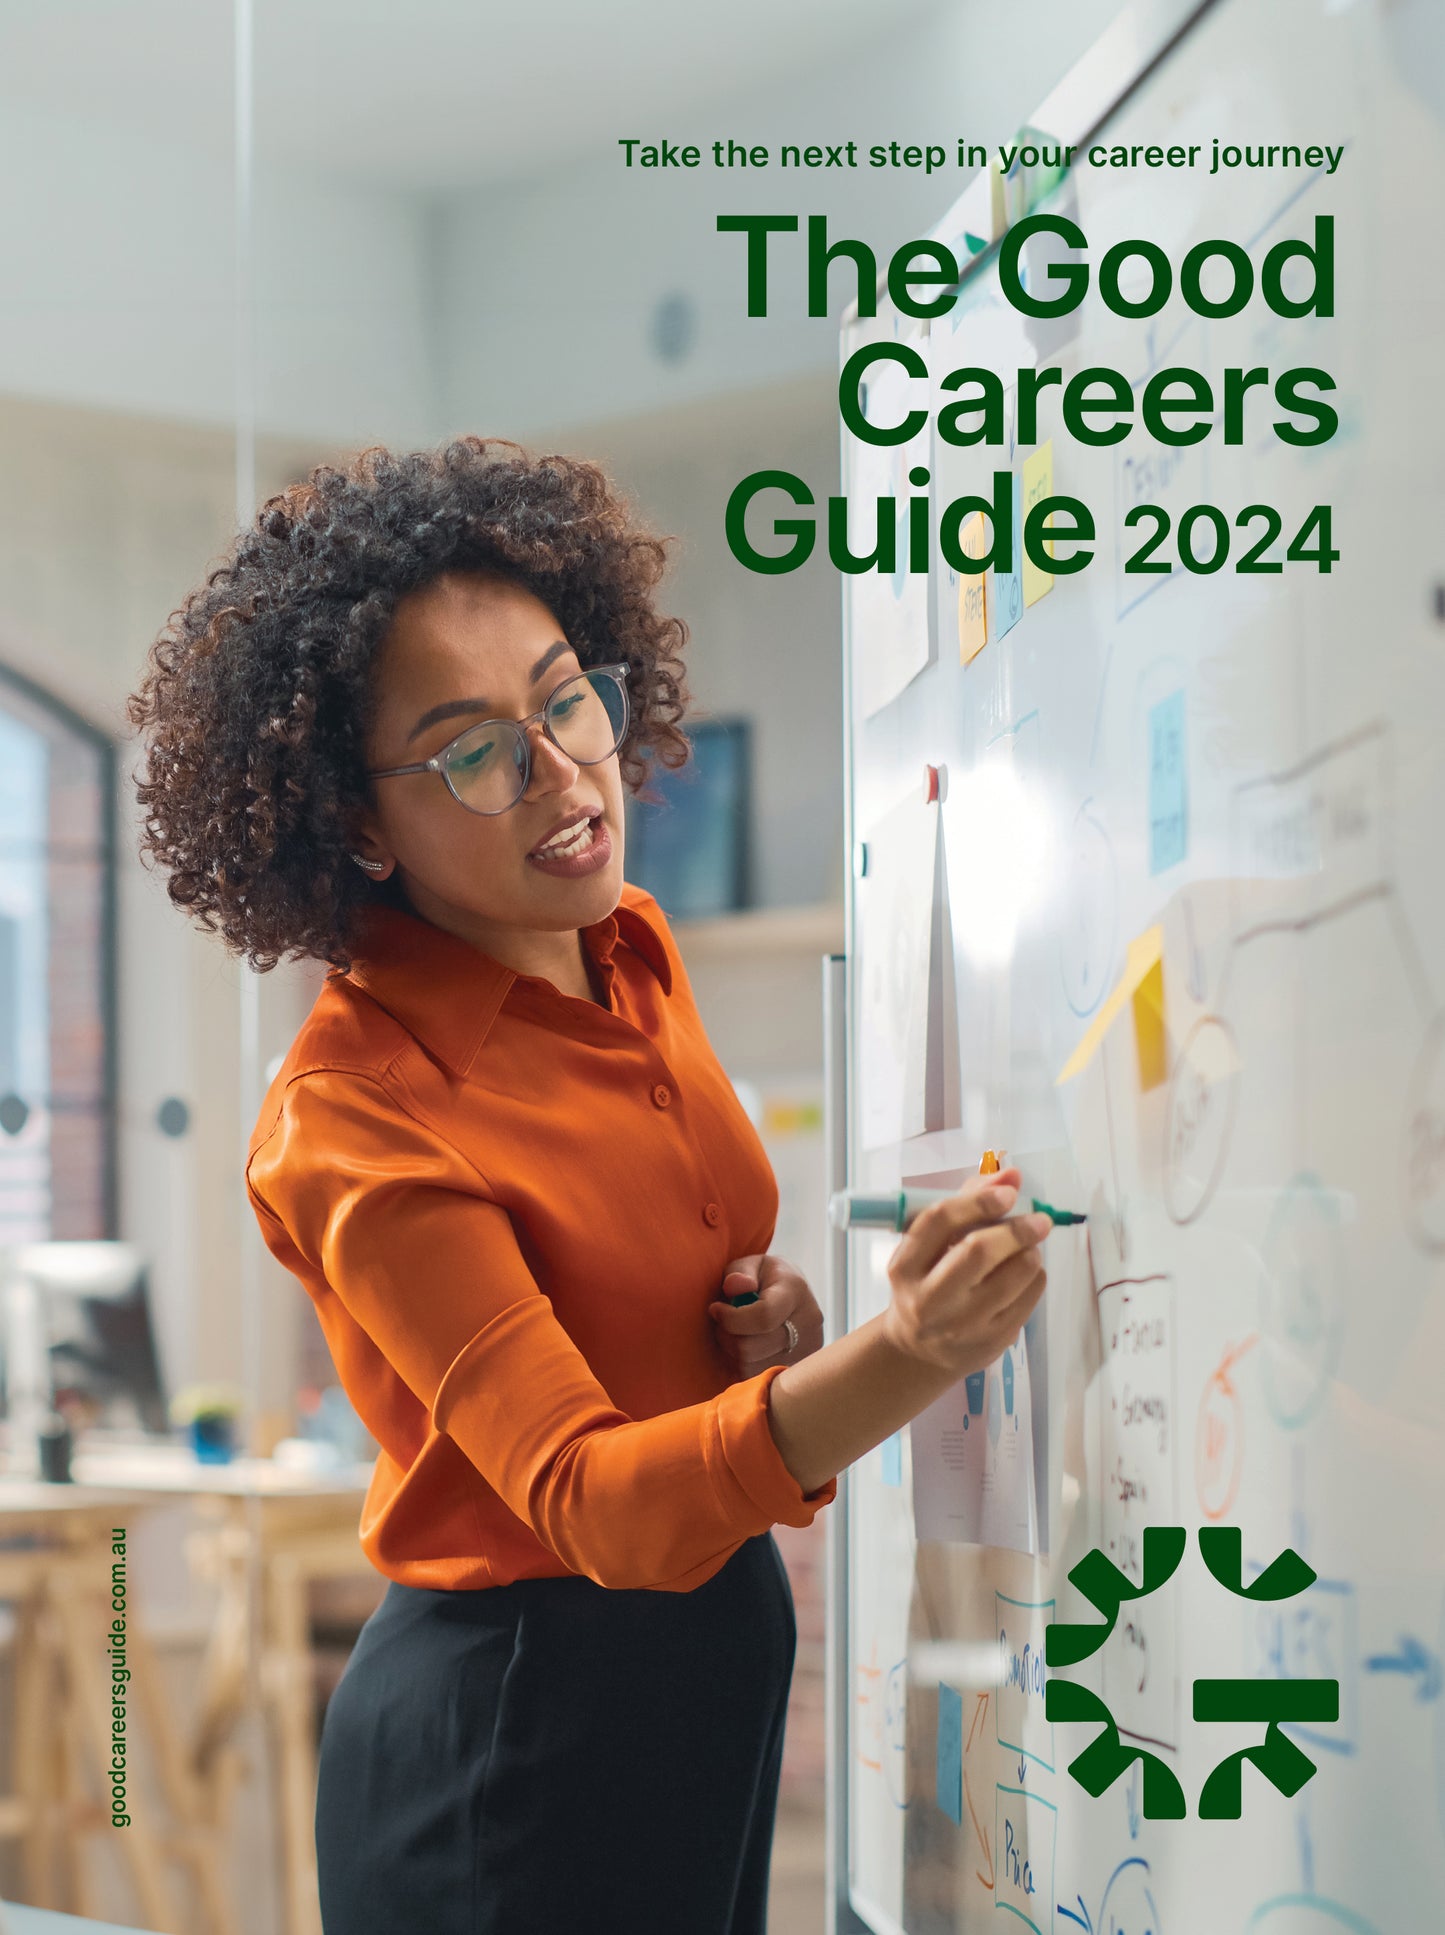 The Good Universities Guide and The Good Careers Guide 2024 Flip Book